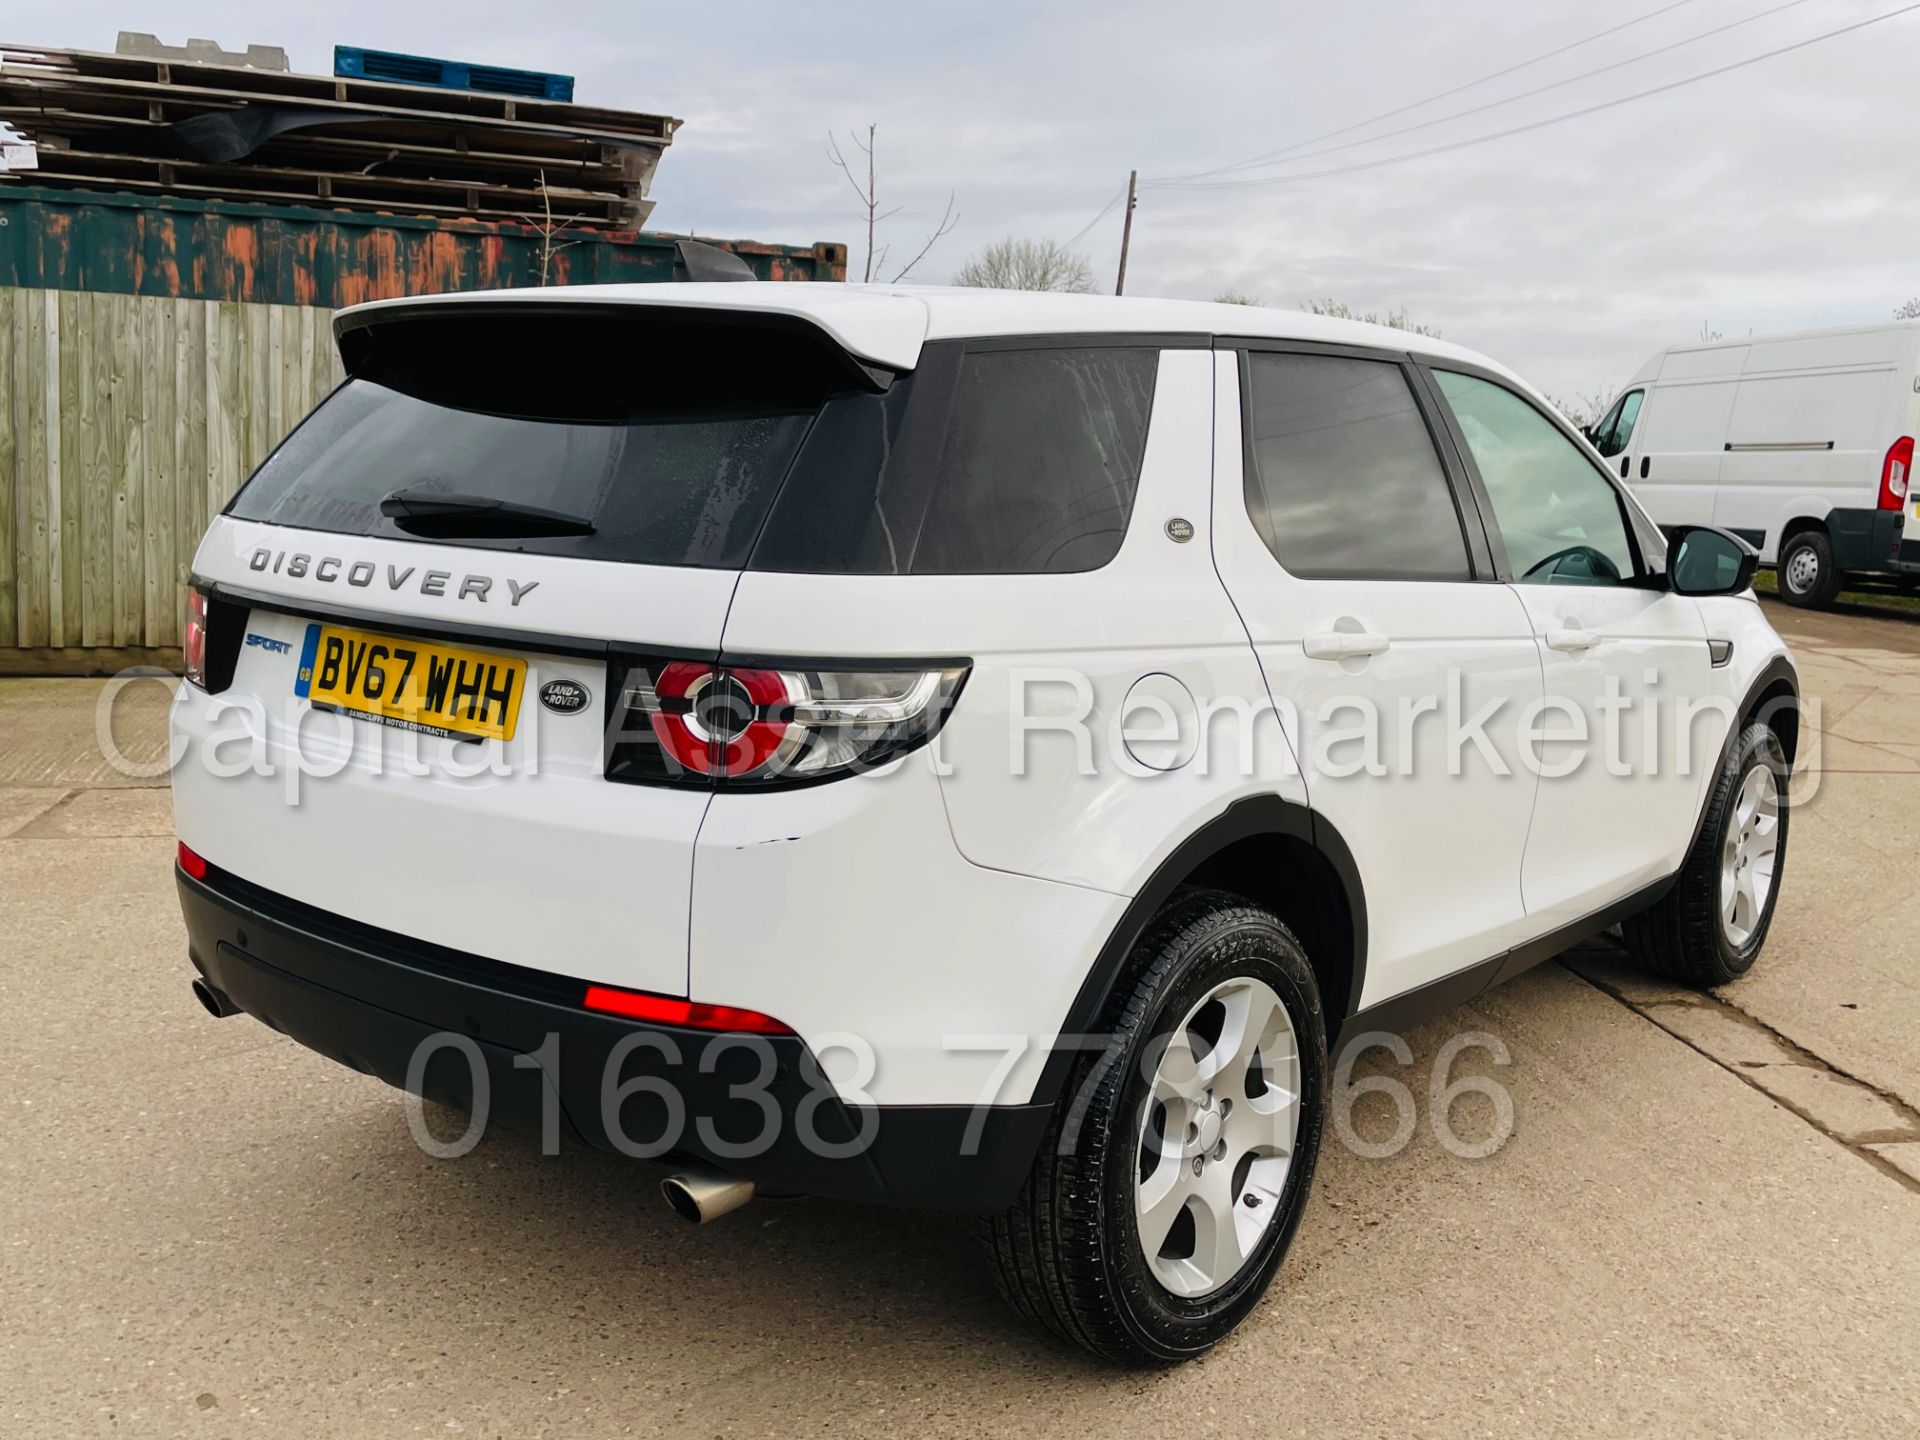 LAND ROVER DISCOVERY SPORT *SPECIAL EDITION* SUV (2018) '2.0 TD4 - STOP/START' (1 OWNER FROM NEW) - Image 12 of 48